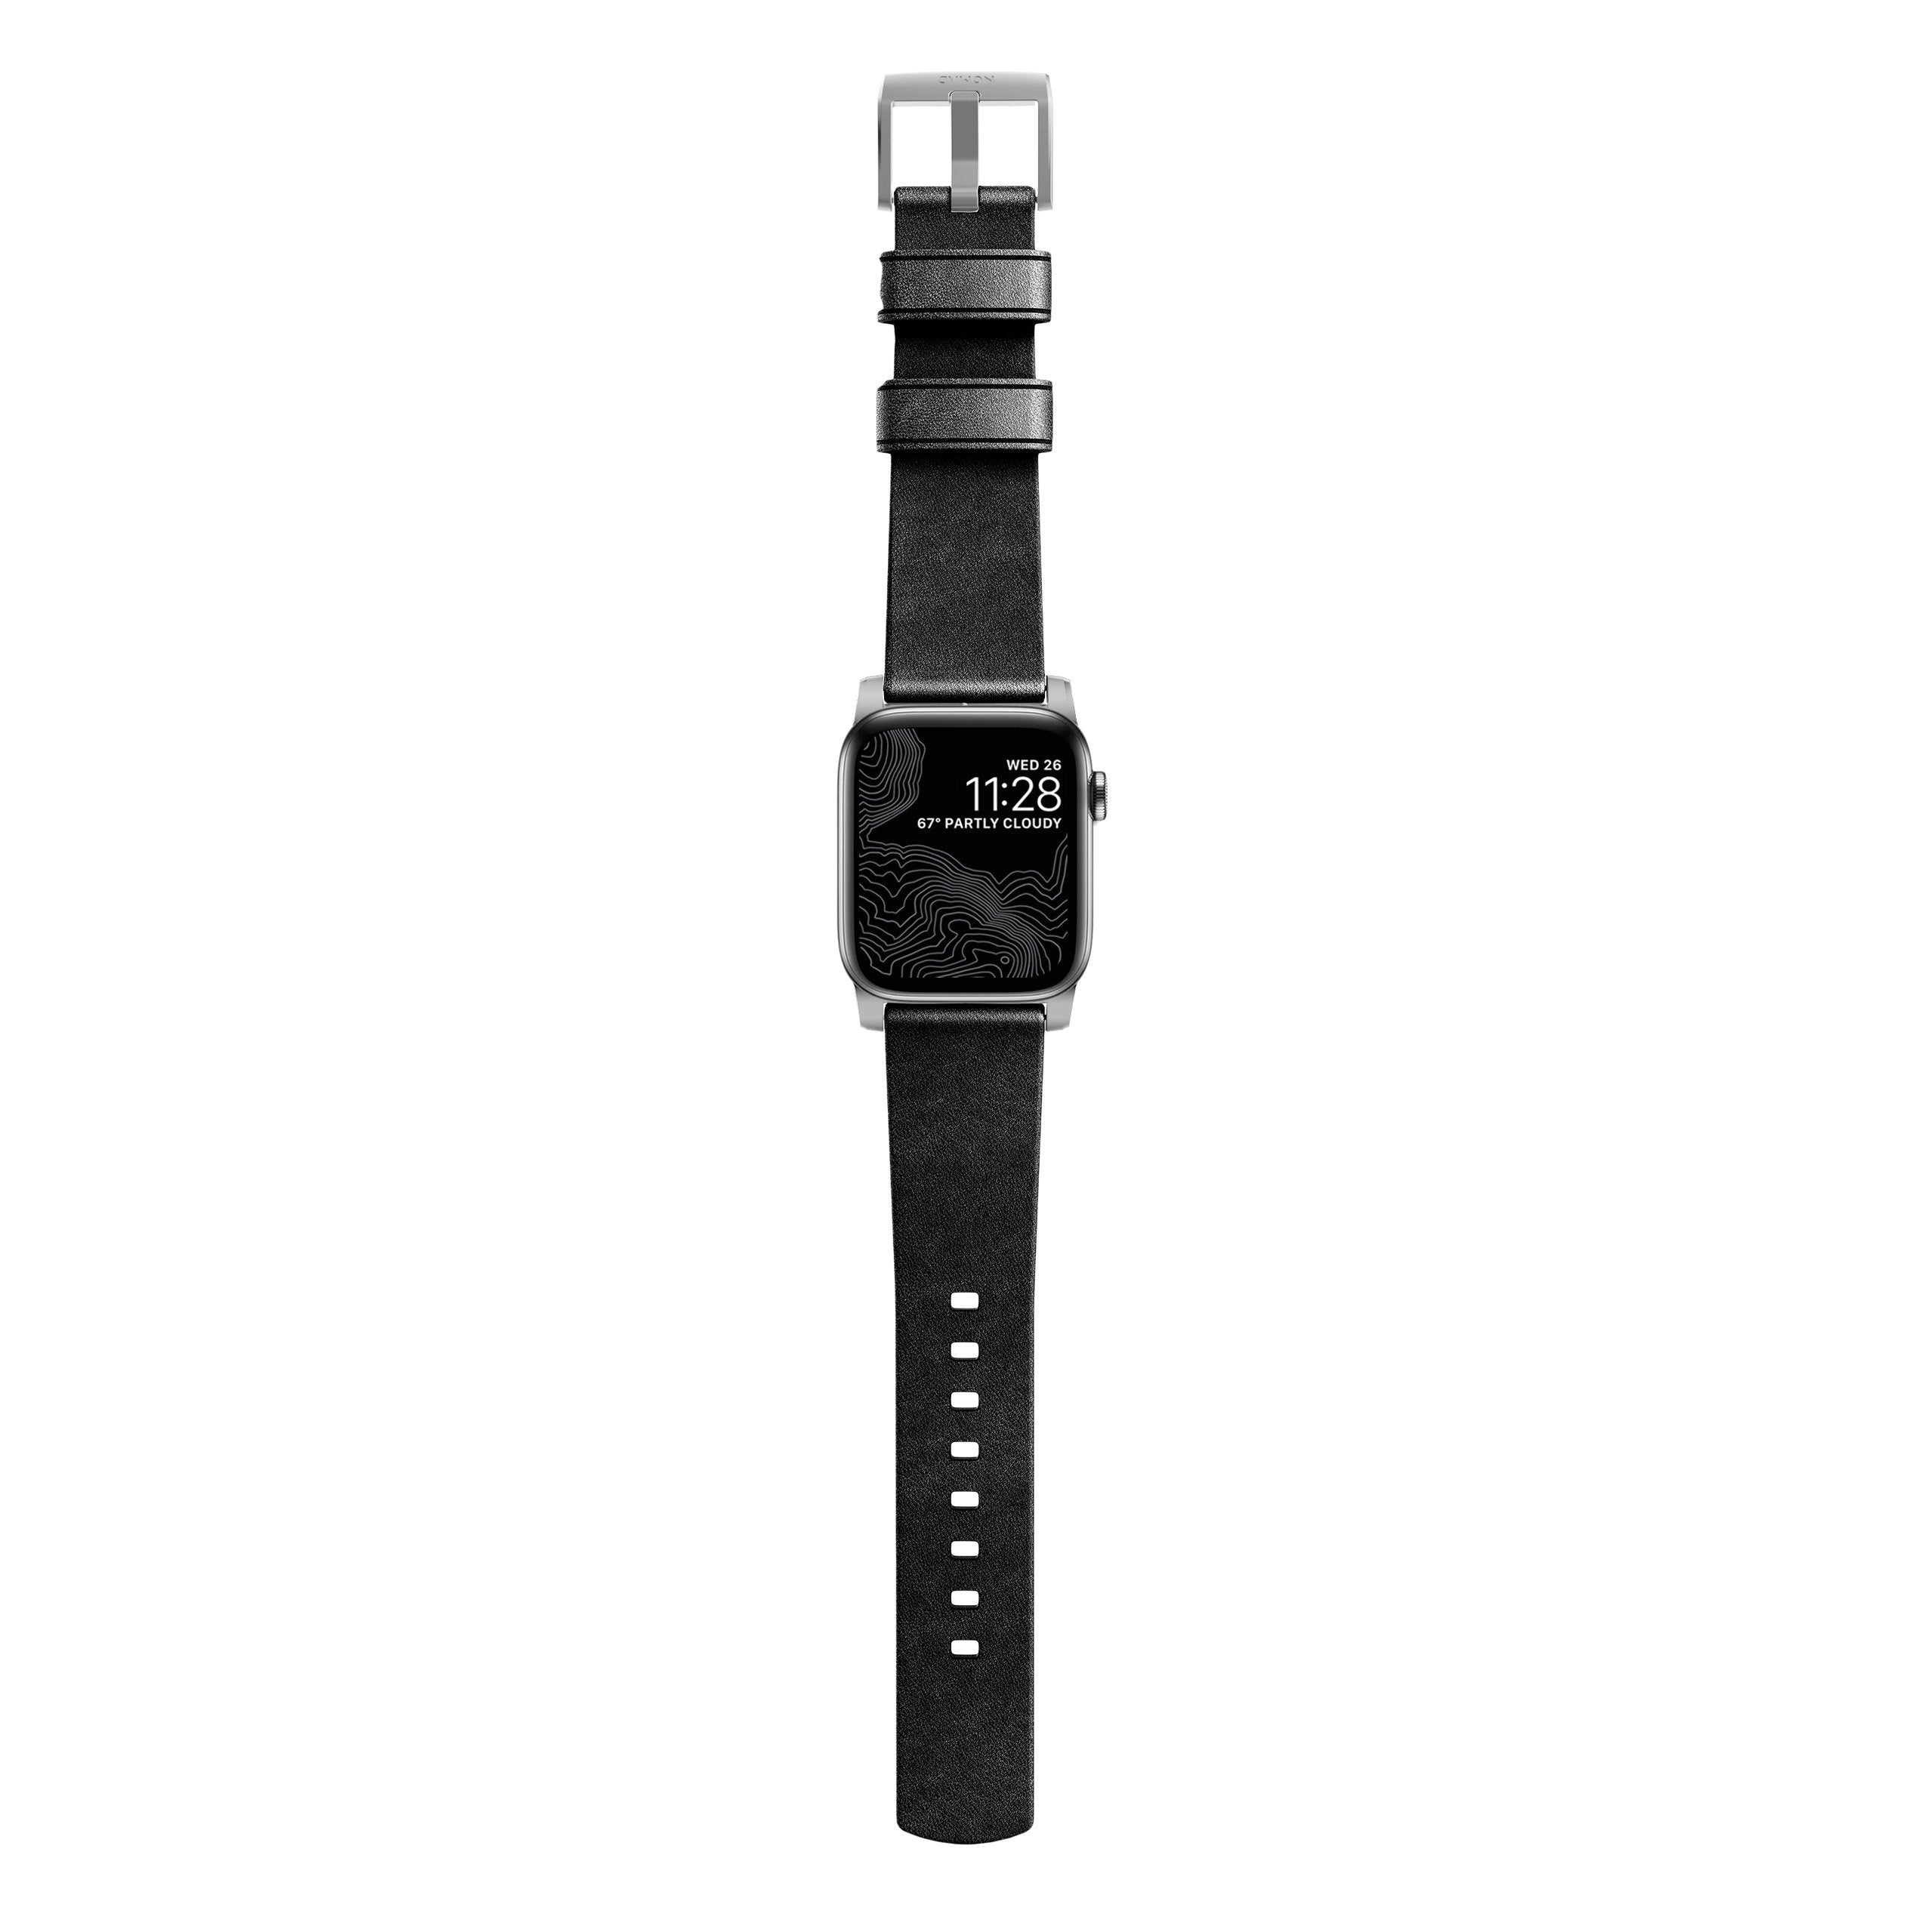 NOMAD Modern Strap Black Horween Leather for Apple Watch 44mm/42mm, Silver Hardware Apple Watch Strap NOMAD 